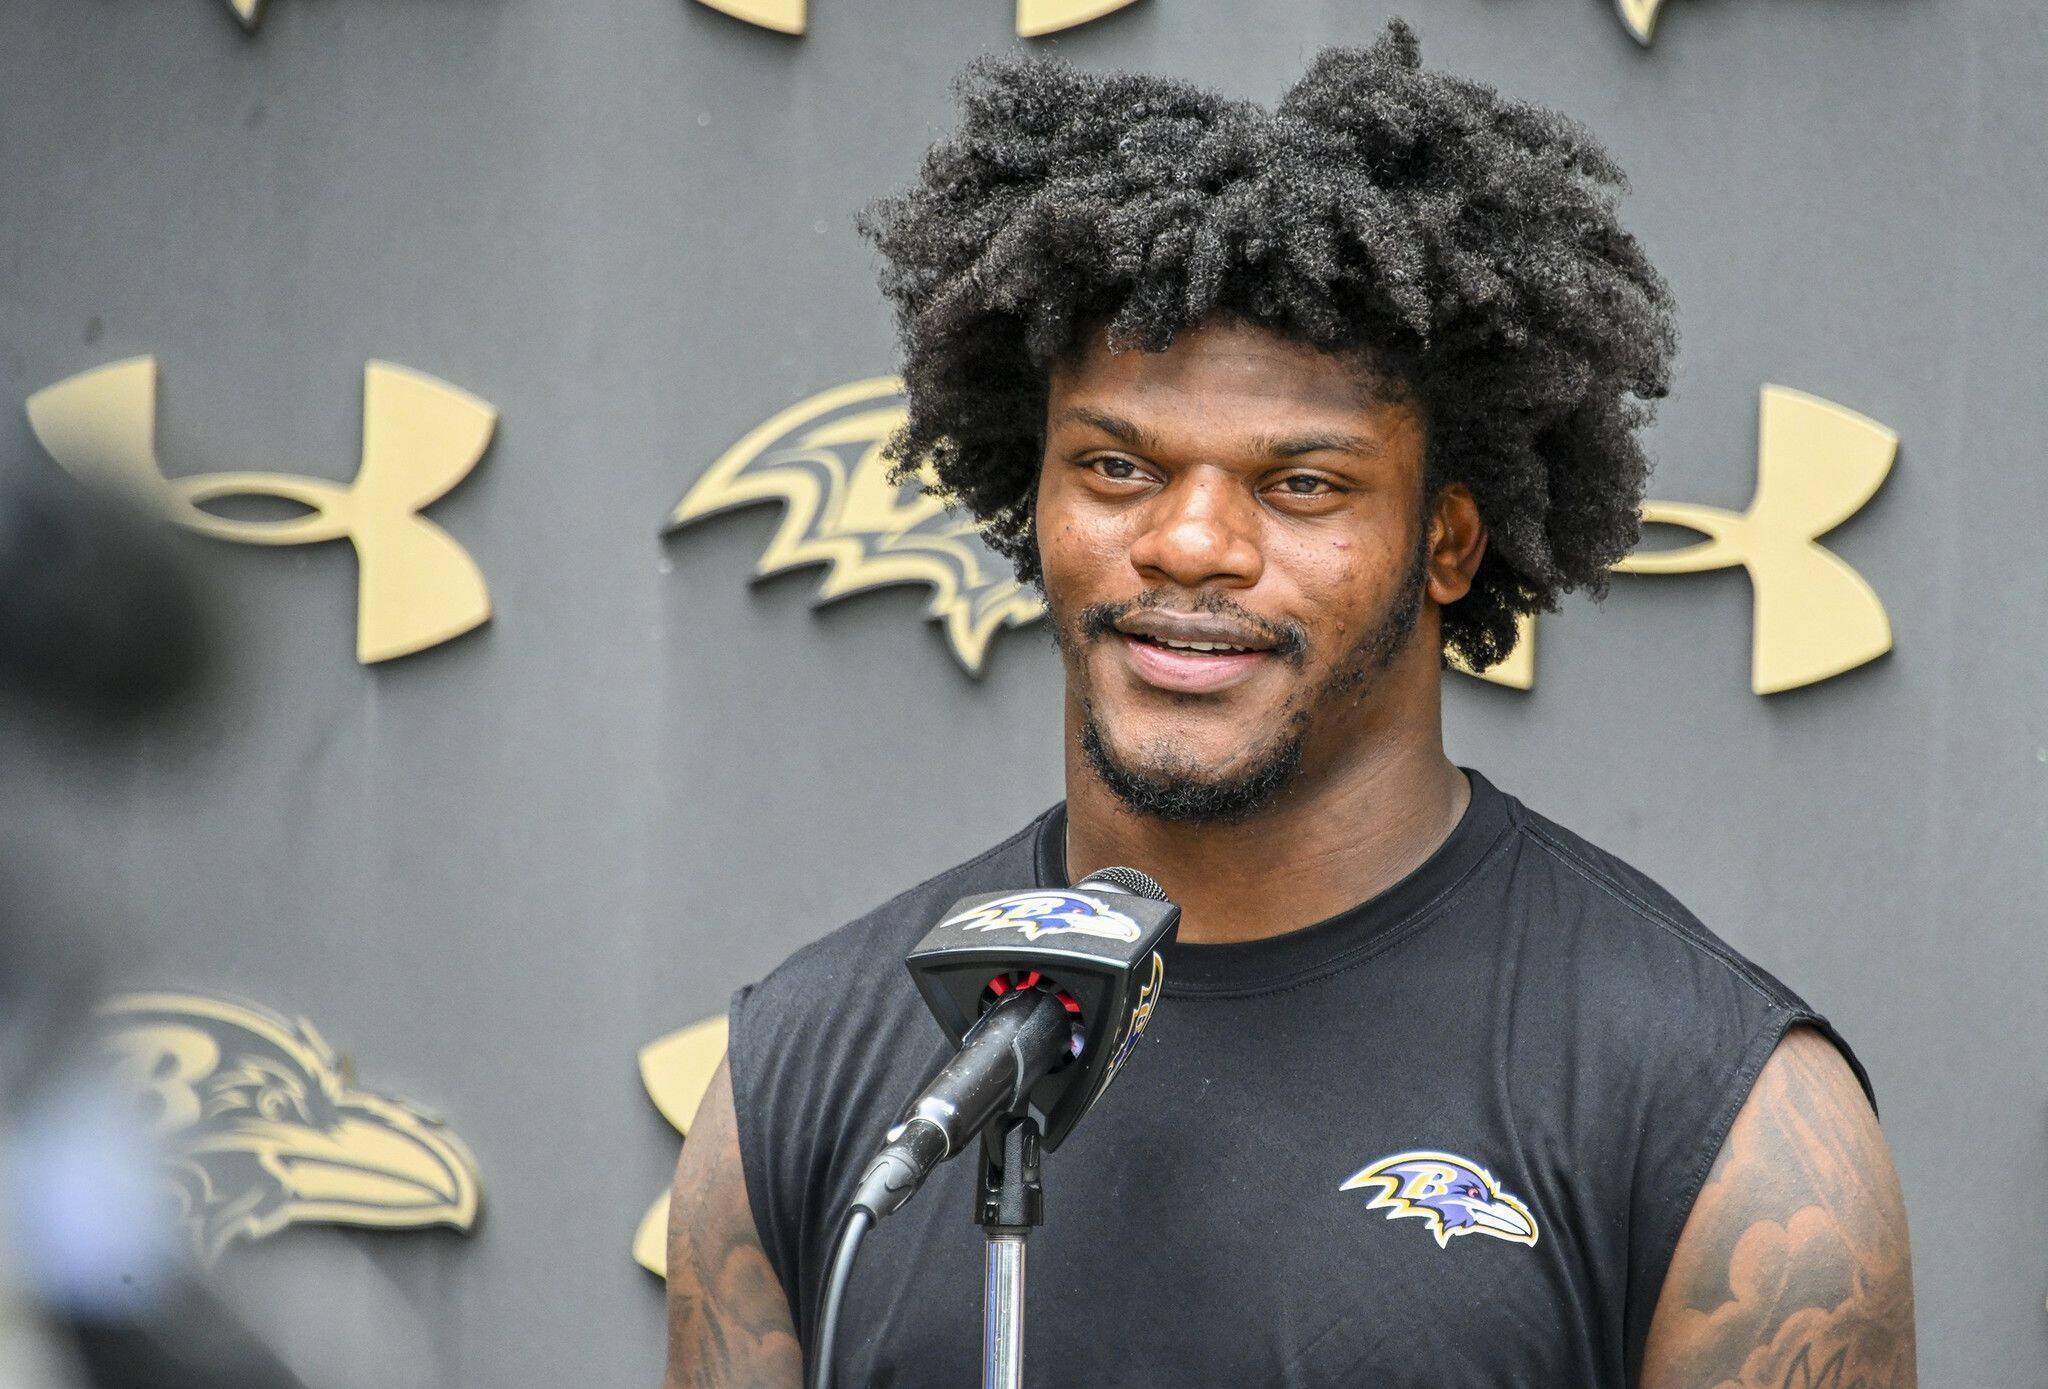 September 7, 2022: Ravens quarterback Lamar Jackson is set to earn $23 million this season, the final year of his rookie contract. Contract talks ramped up during the summer, but Jackson declined to comment on whether the sides had made progress. - ZUMAm67_ 20220907_zaf_m67_027 Copyright: xKevinxRichardsonx